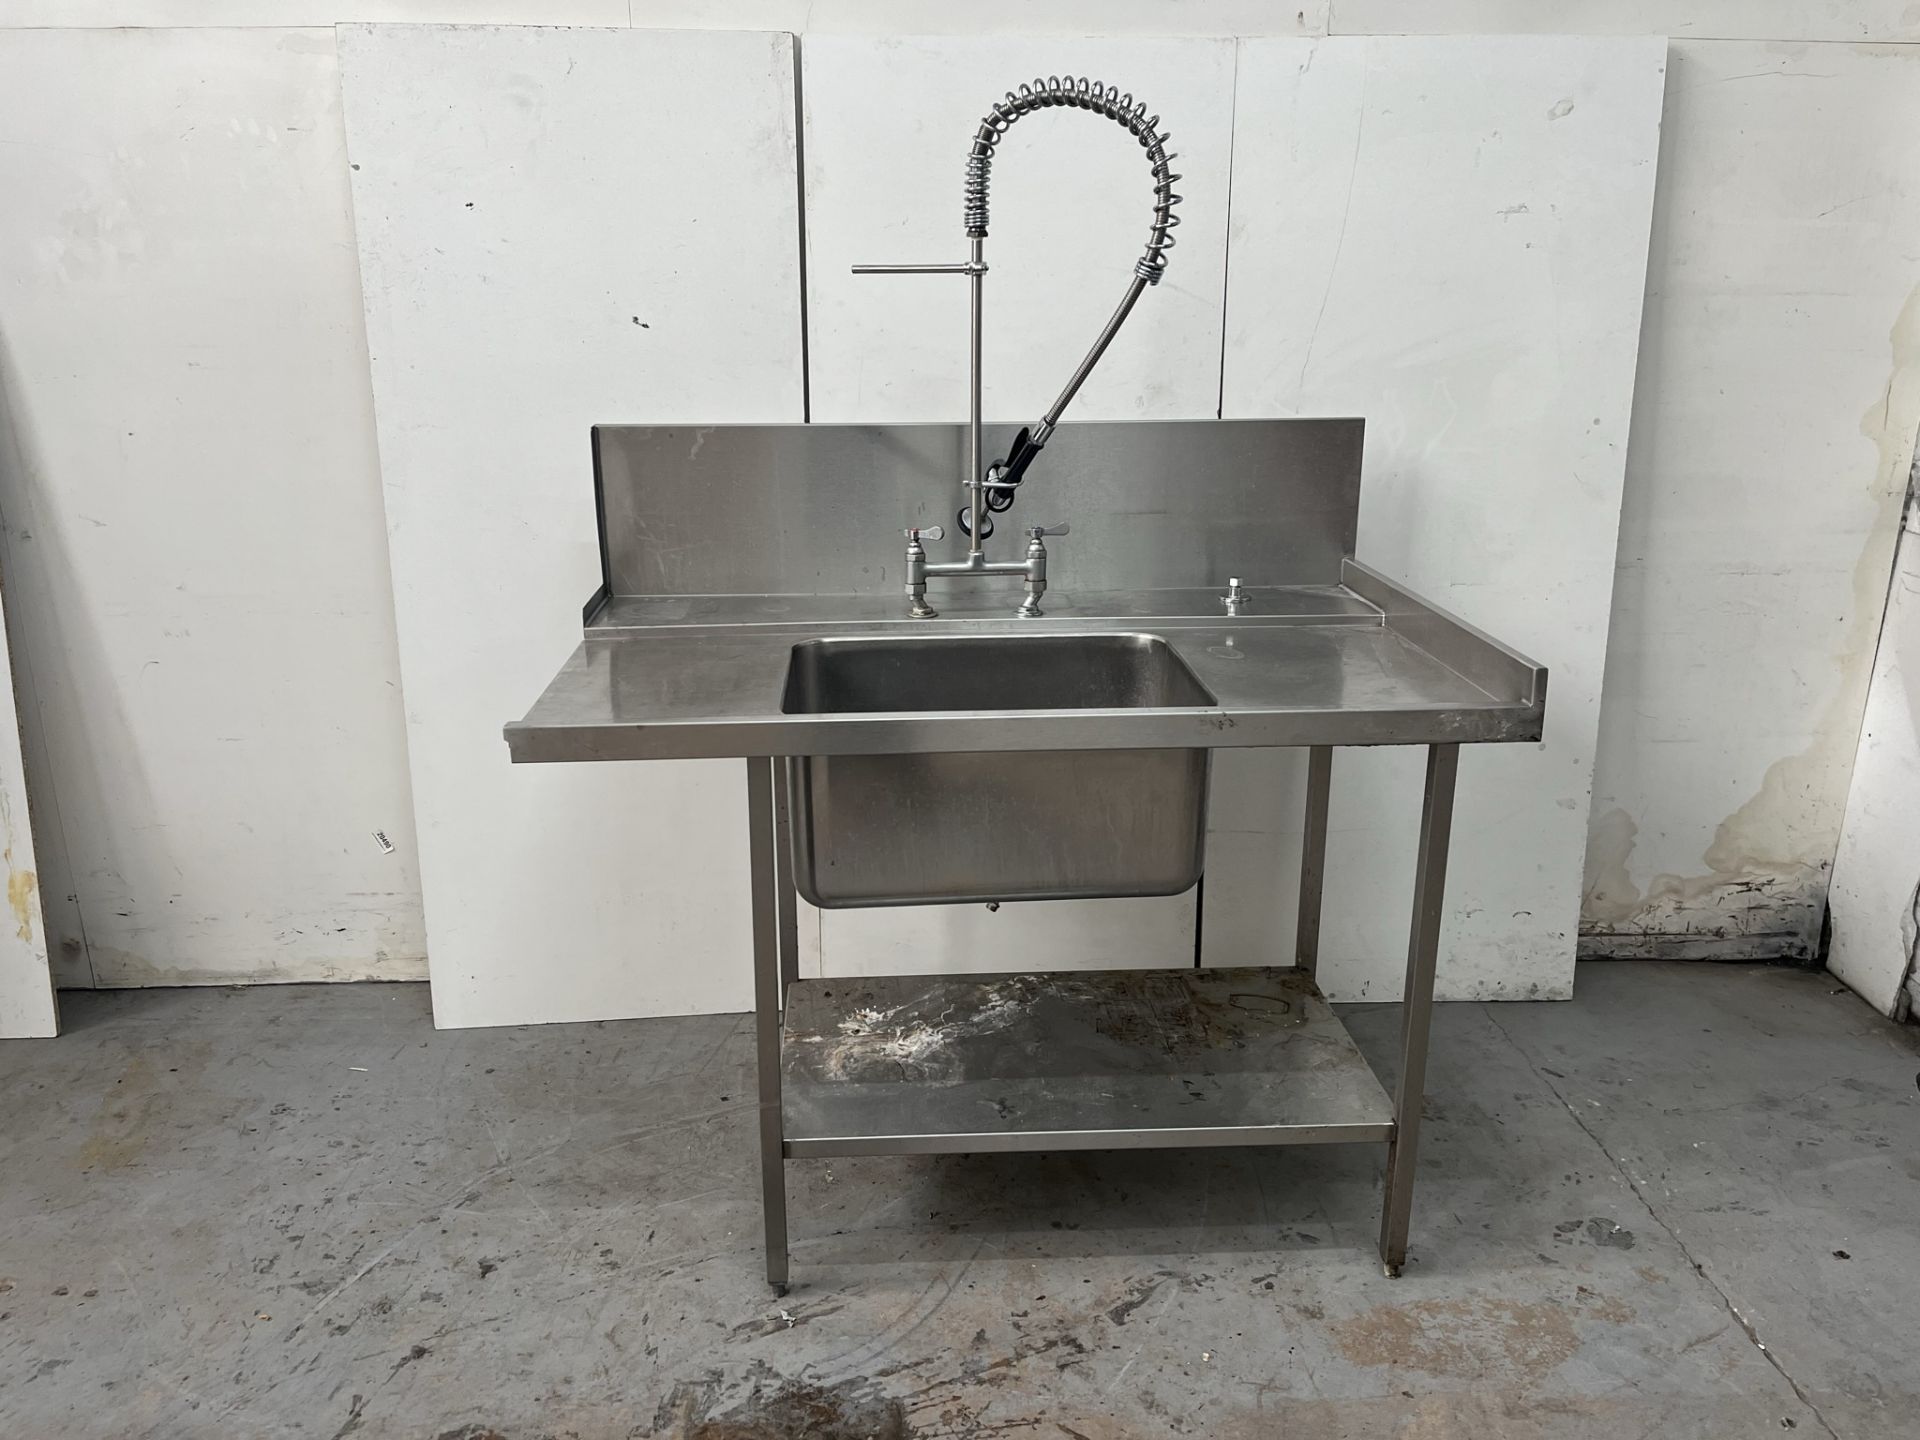 Commercial Stainless Steel Catering Table With Pre Rinse Tap & Sink